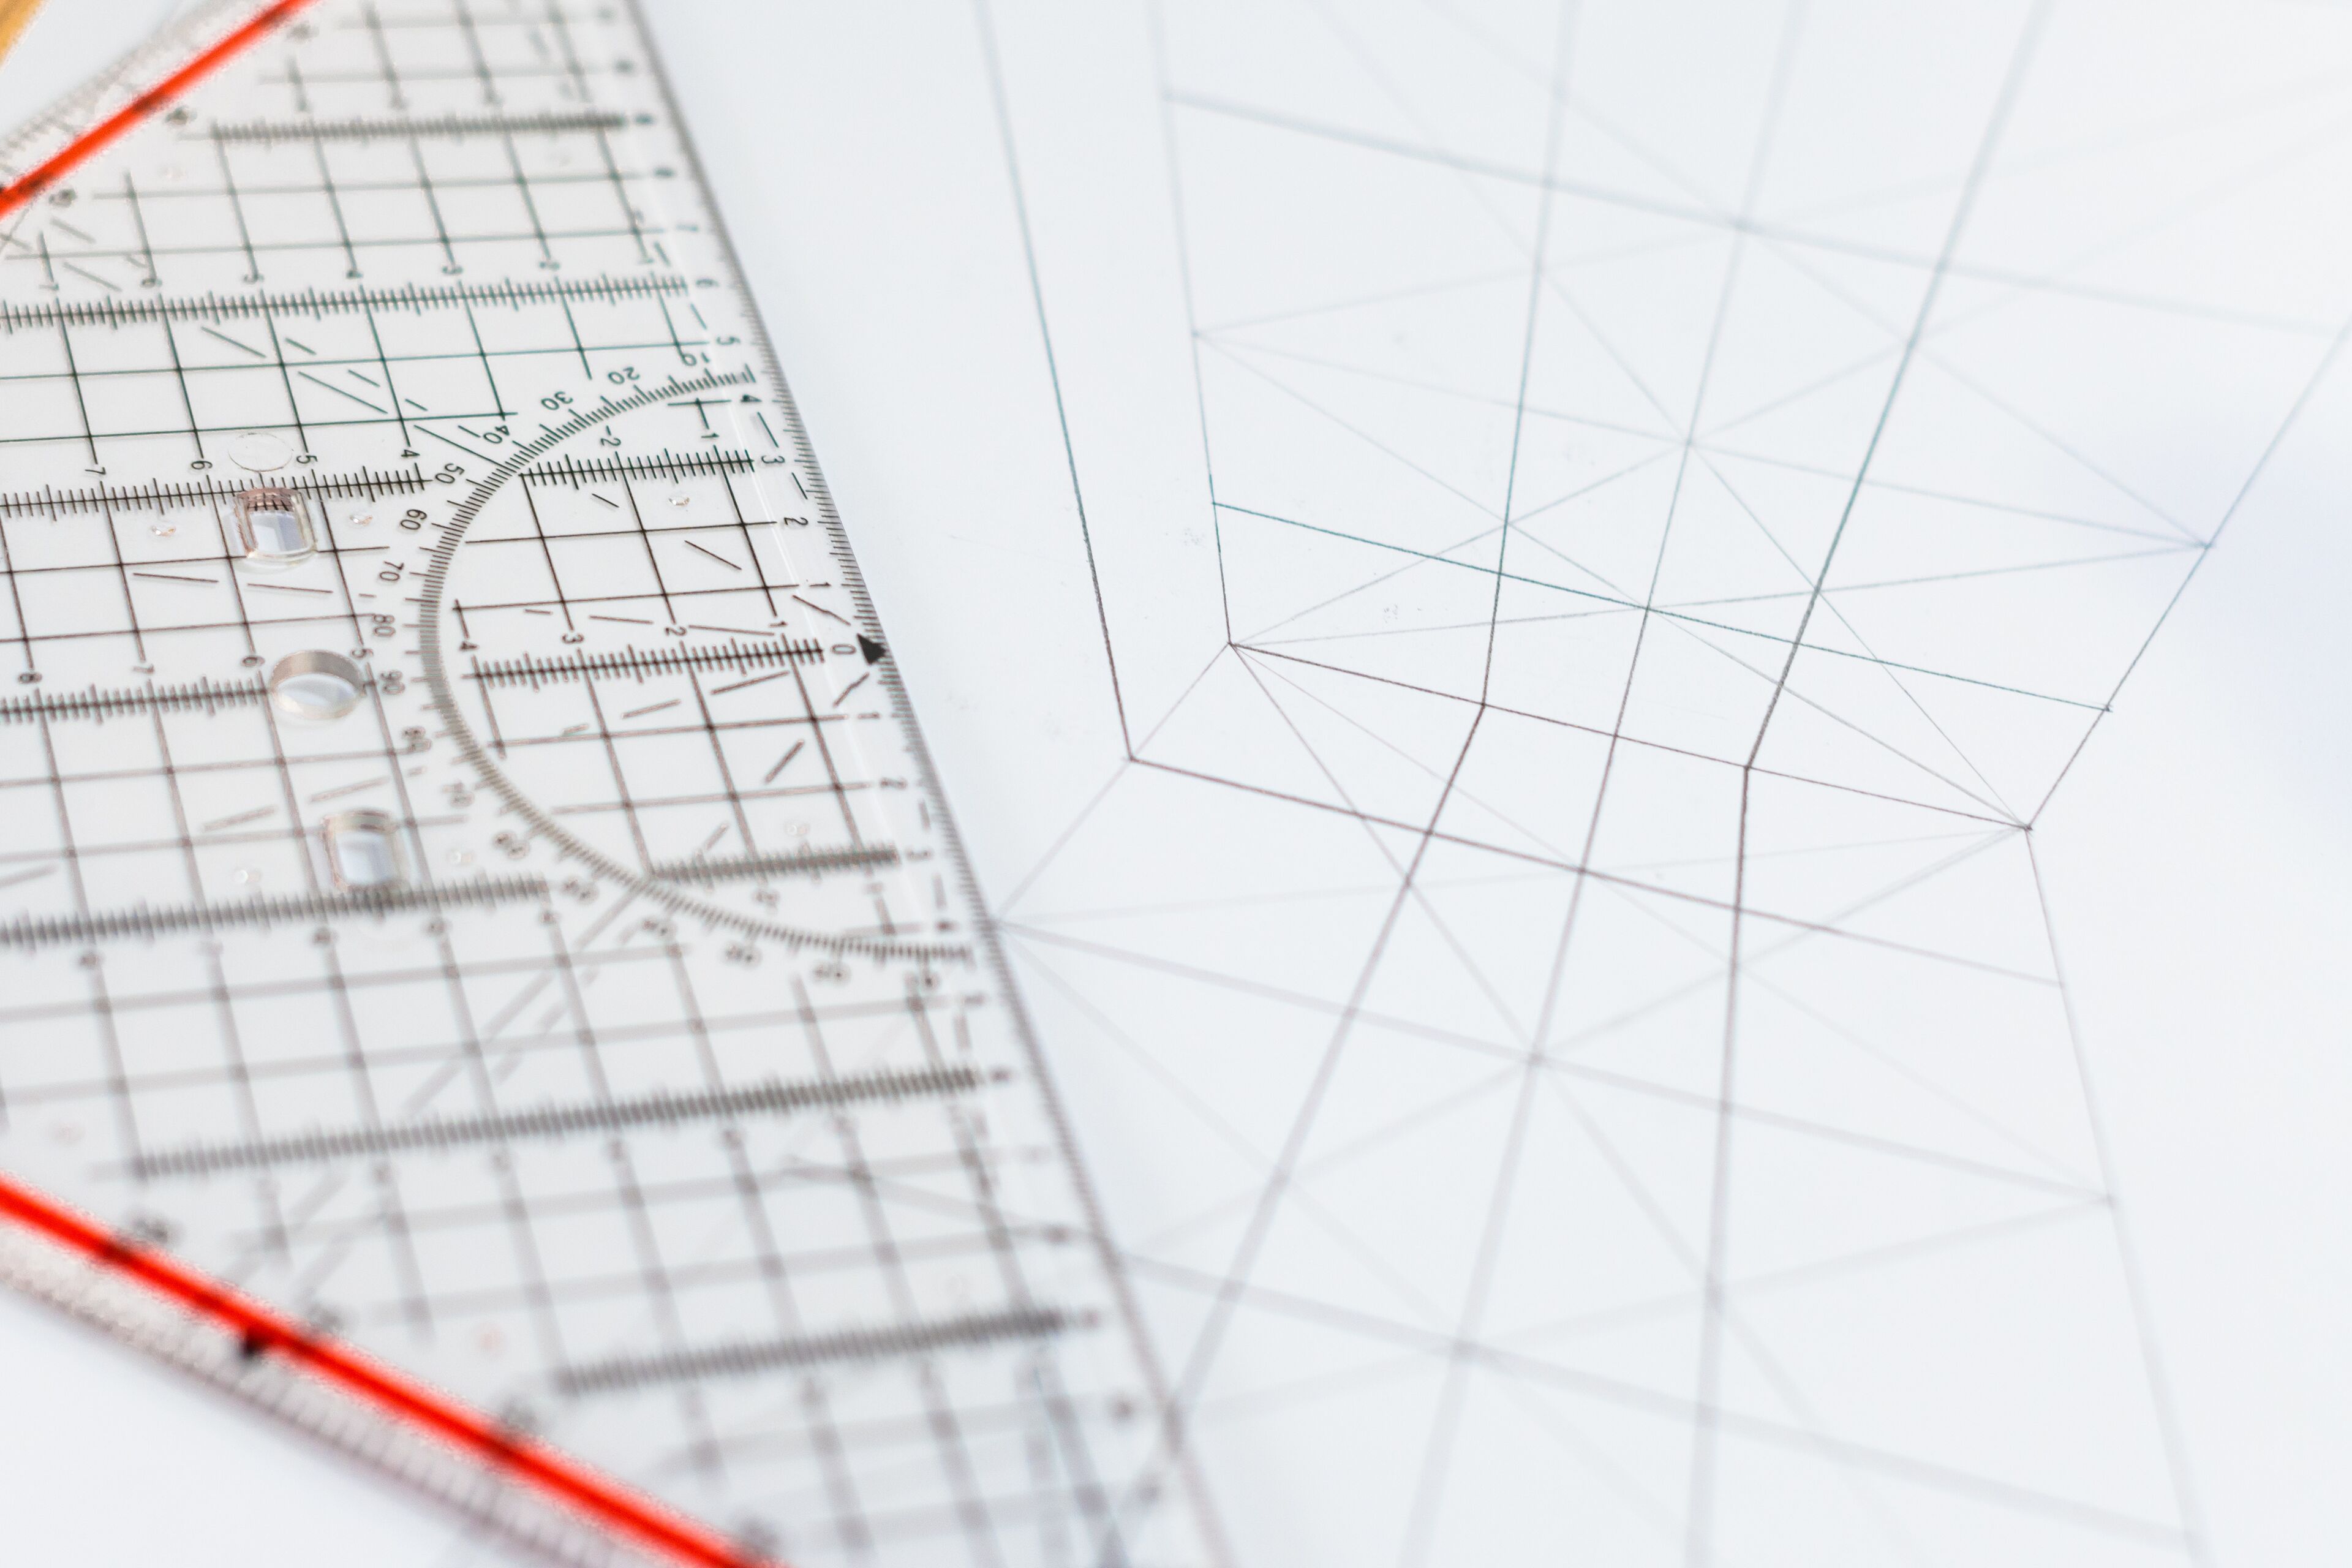 Transparent rulers with a protractor overlay geometrical shapes on paper.